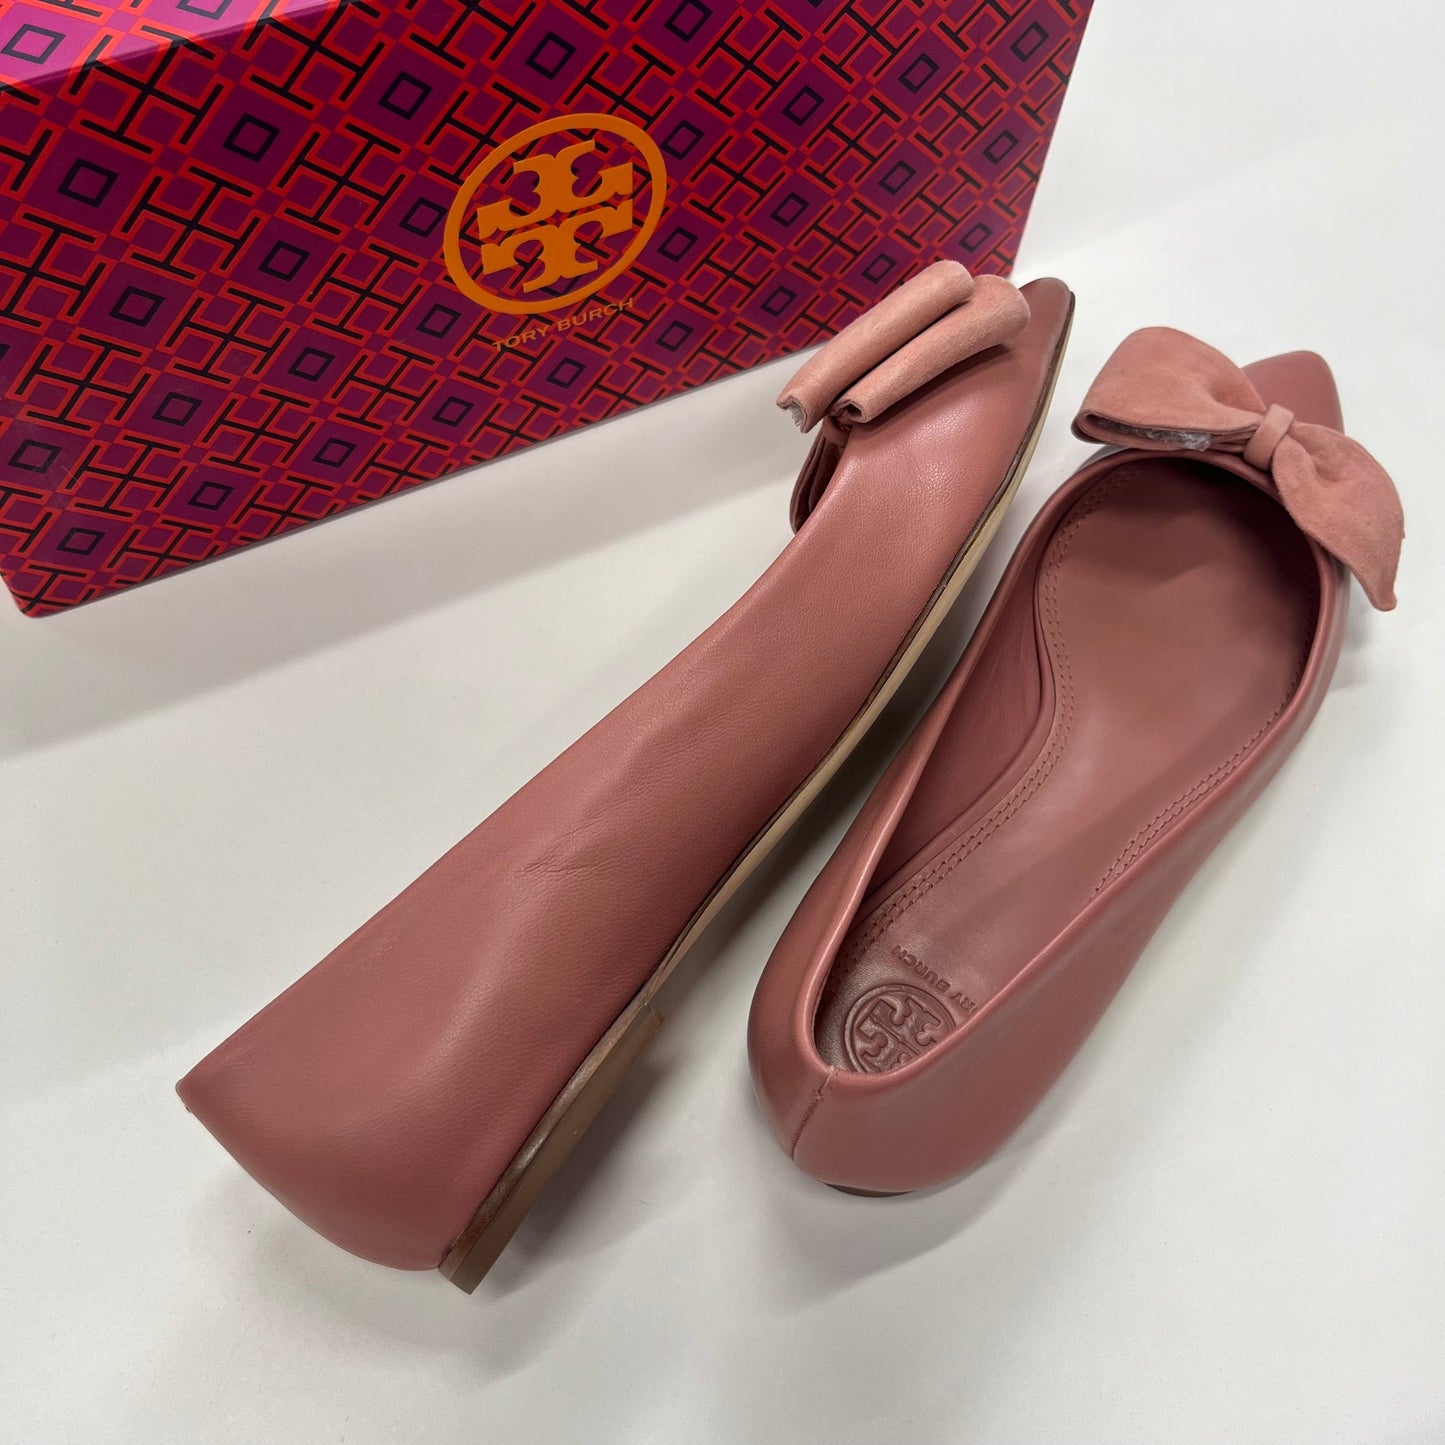 Pink Shoes Flats Ballet Tory Burch, Size 9